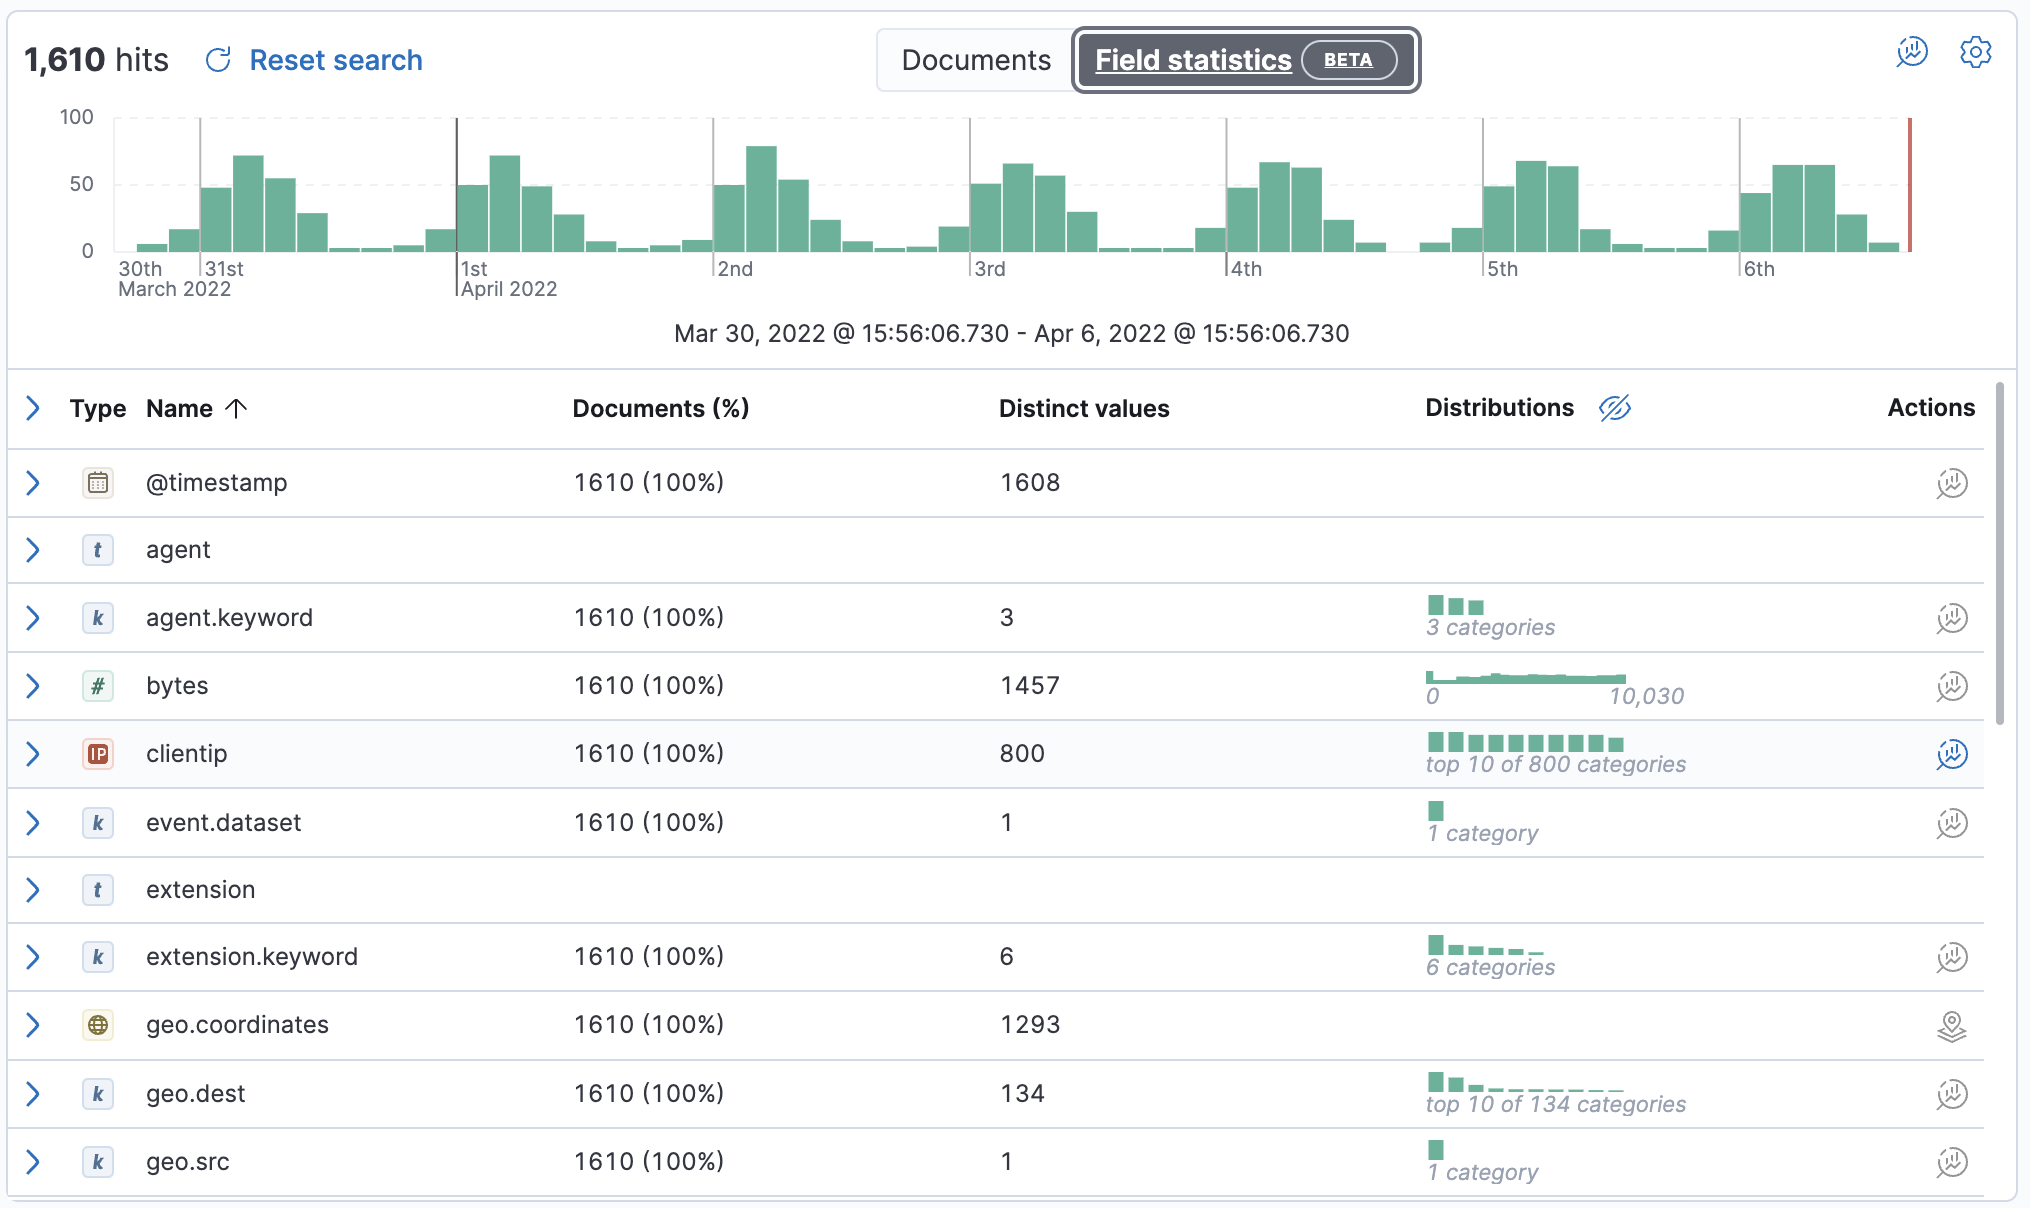 Field statistics view in Discover showing a summary of document data.